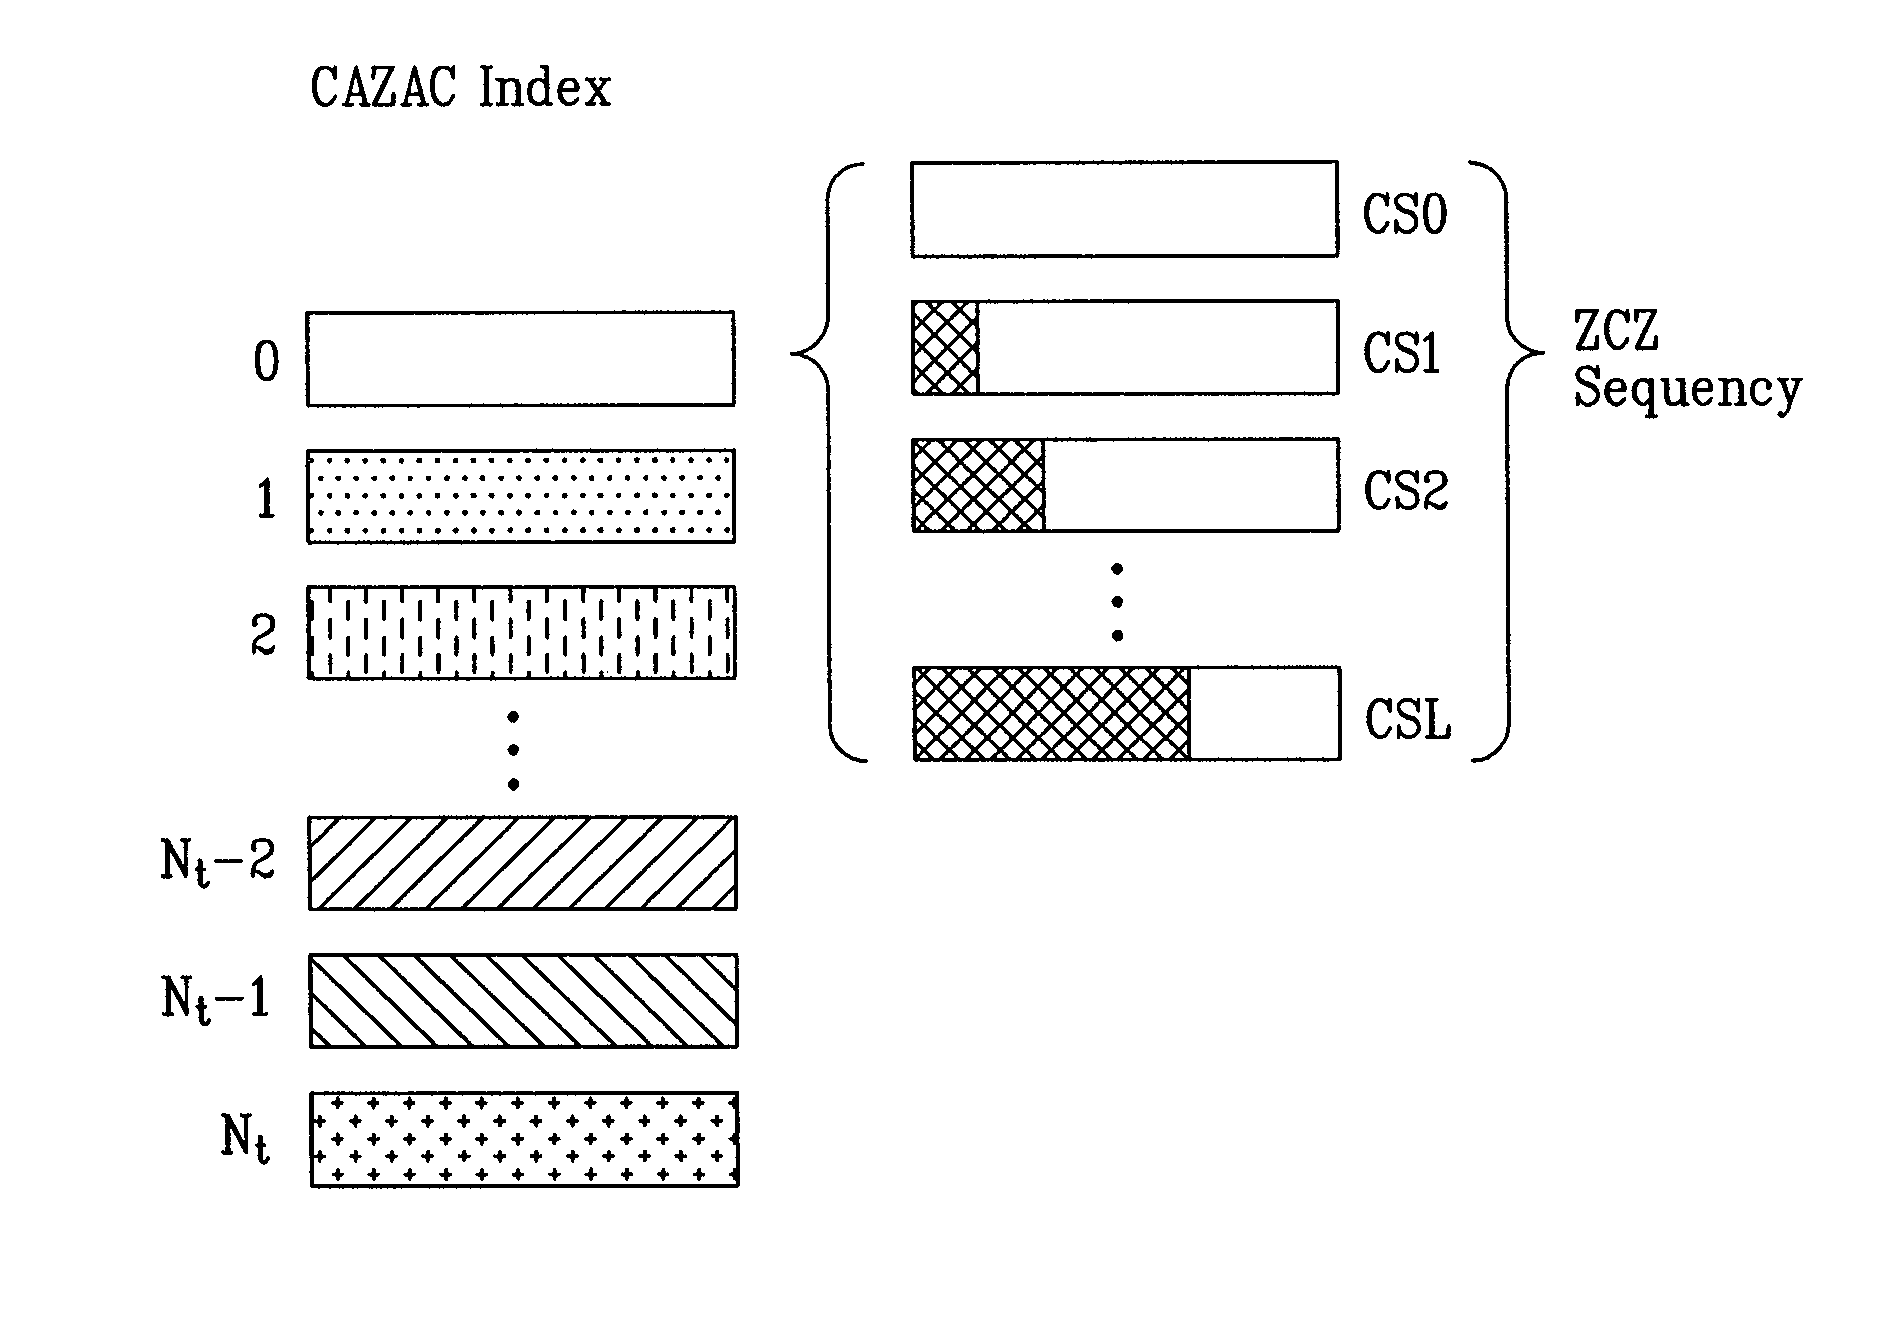 Method for selecting rach freamble sequence for high-speed mode and low-speed mode